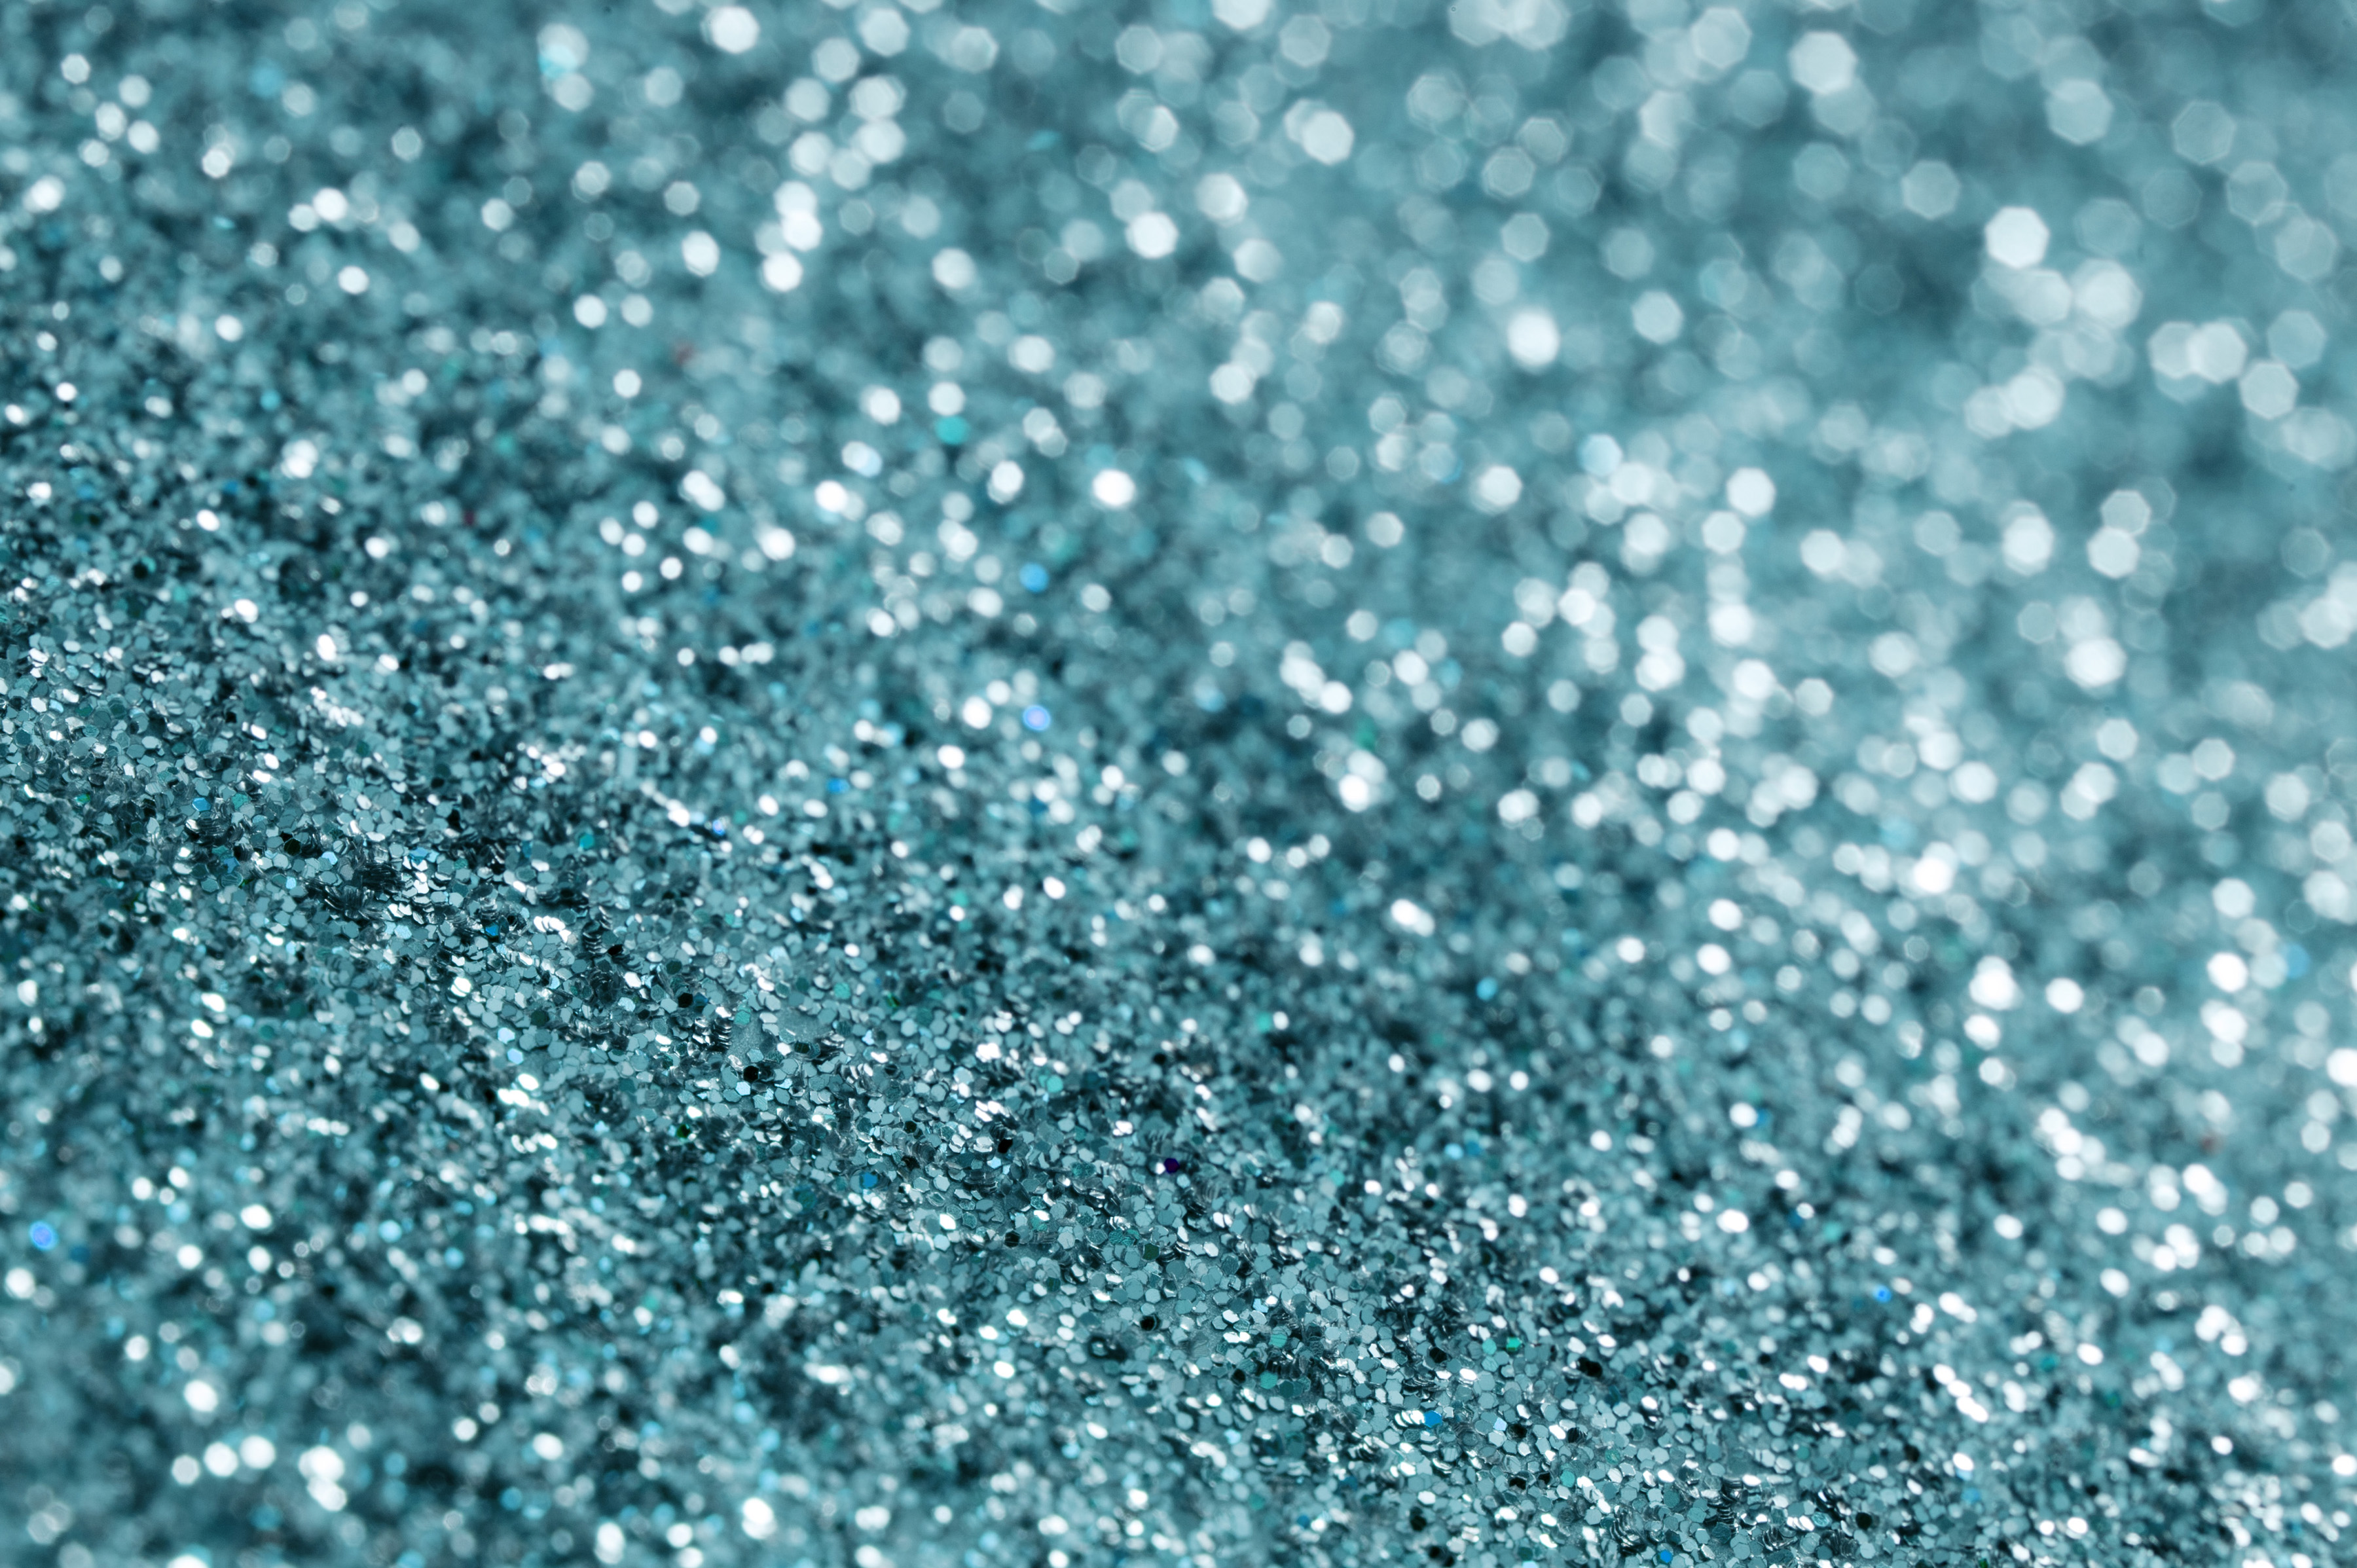 Blue Glitter Free backgrounds and textures Cr103.com Teal Glitter Backgroun...